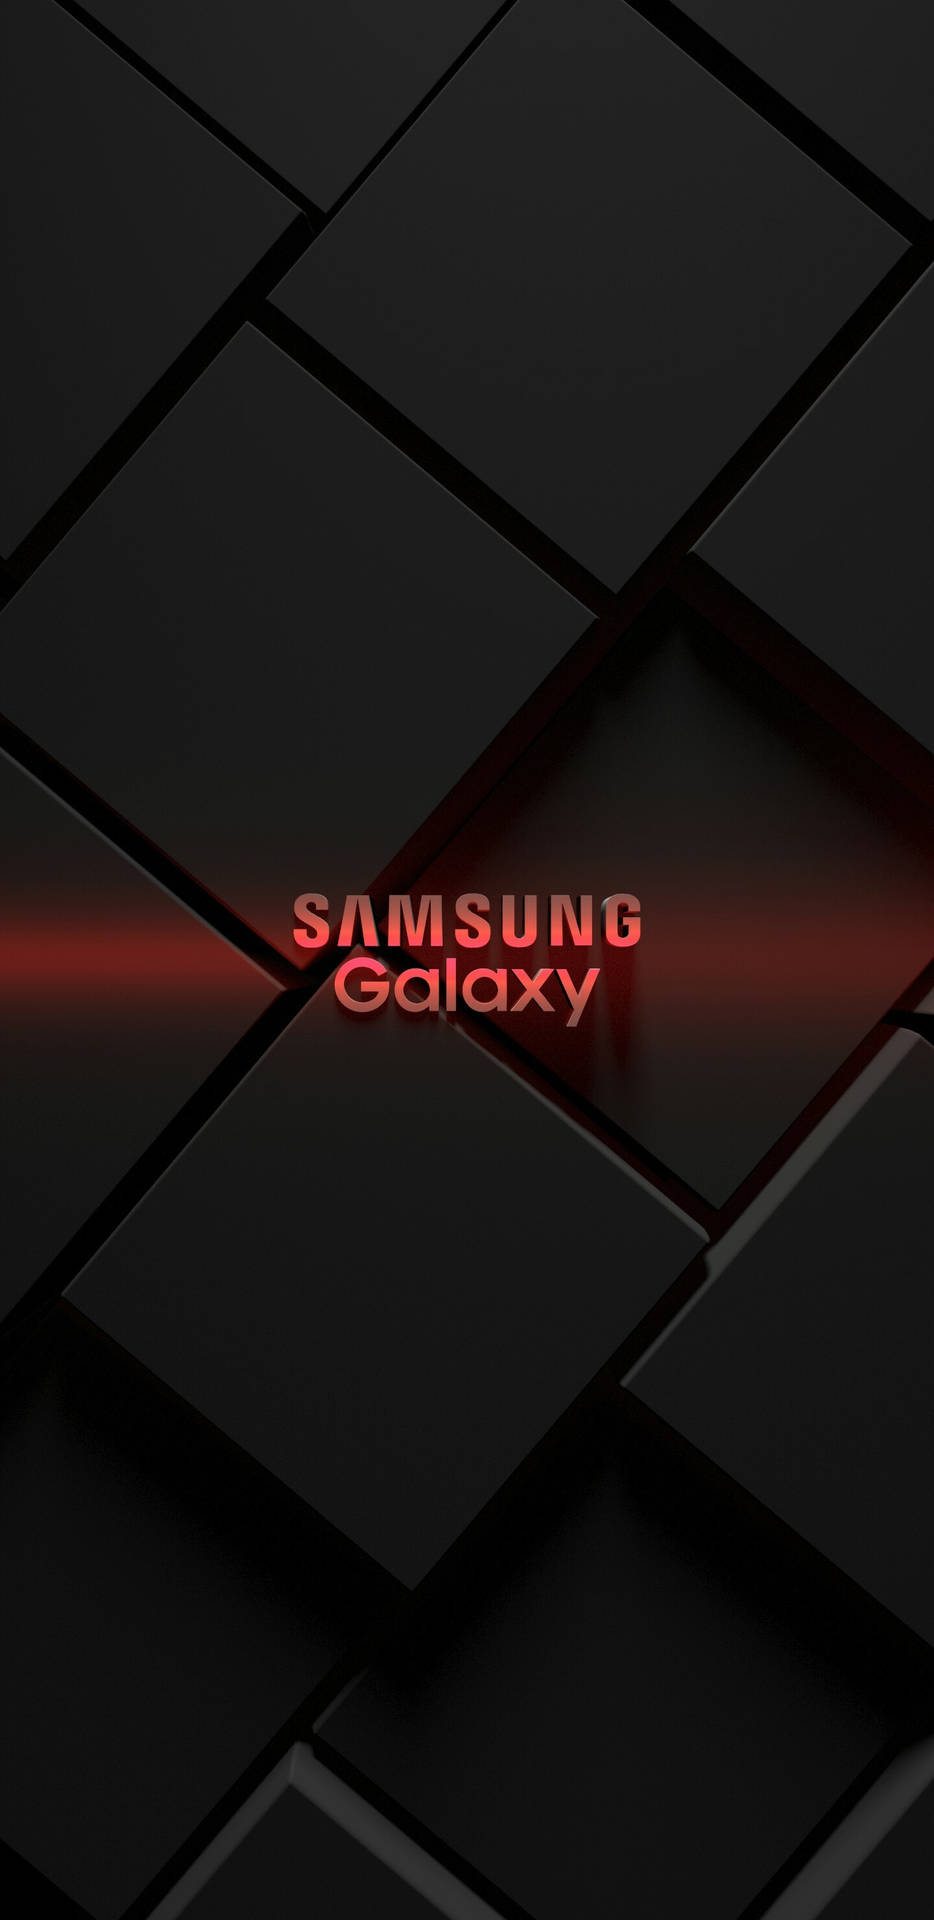 Samsung Galaxy Geometric Red Light Picture